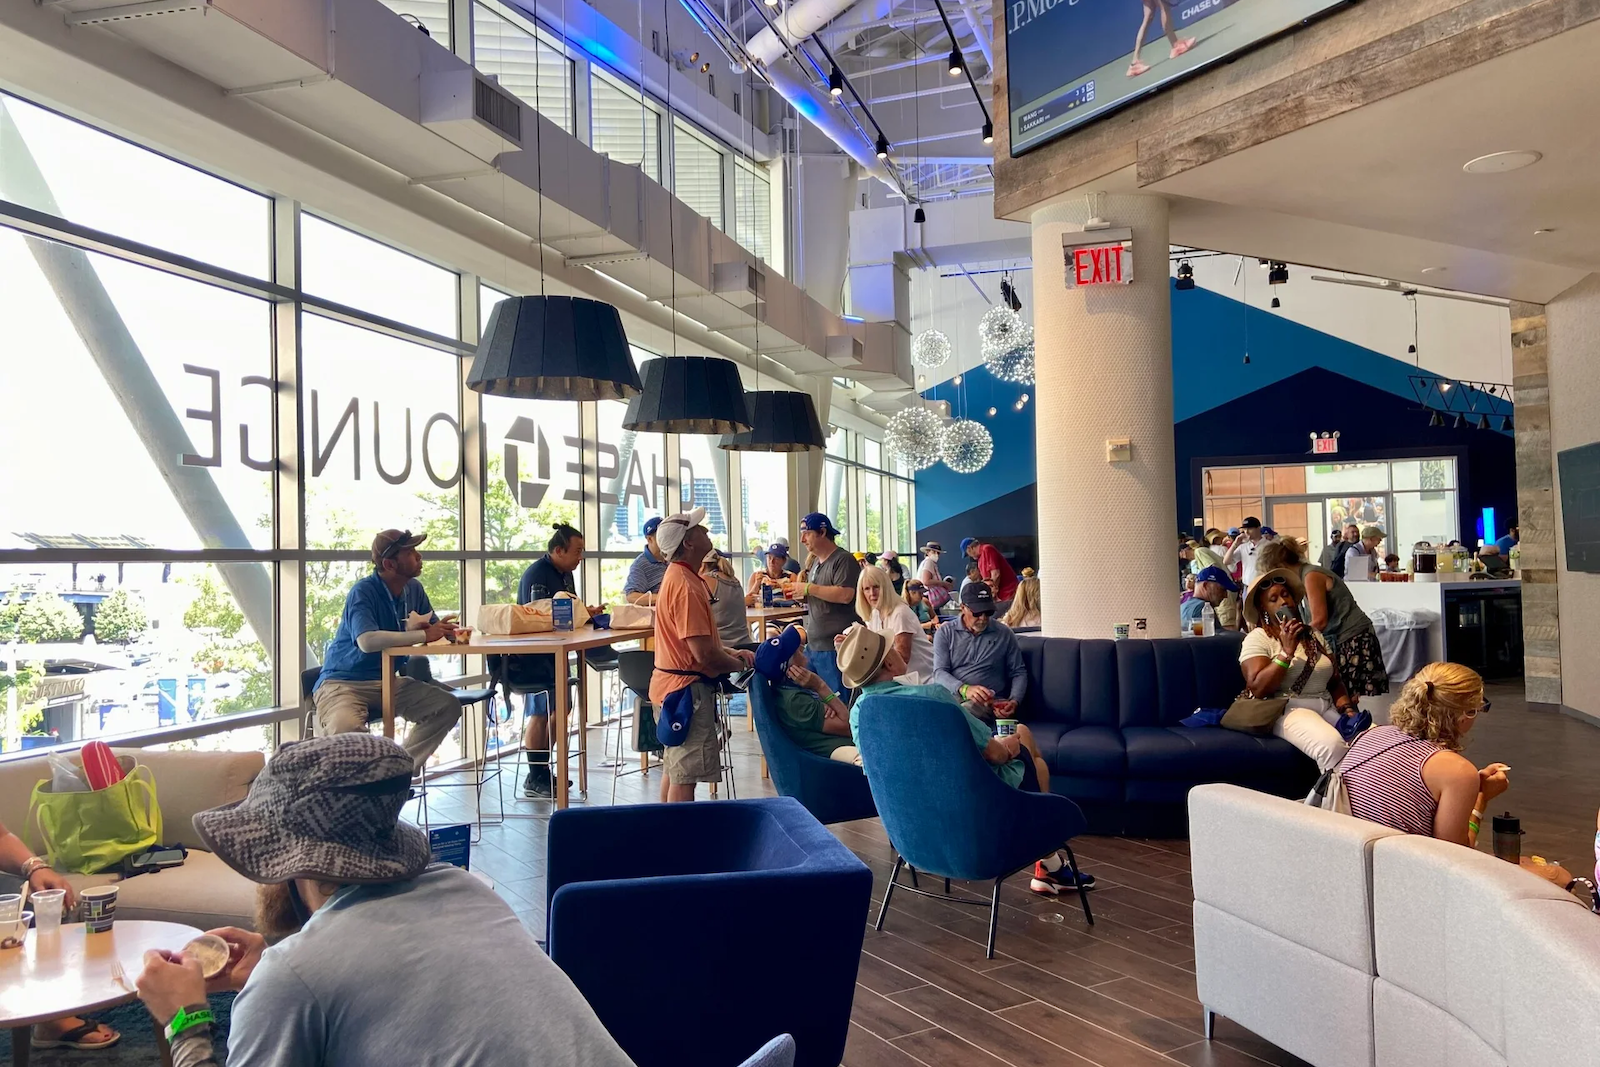 People inside a lounge, eating and drinking